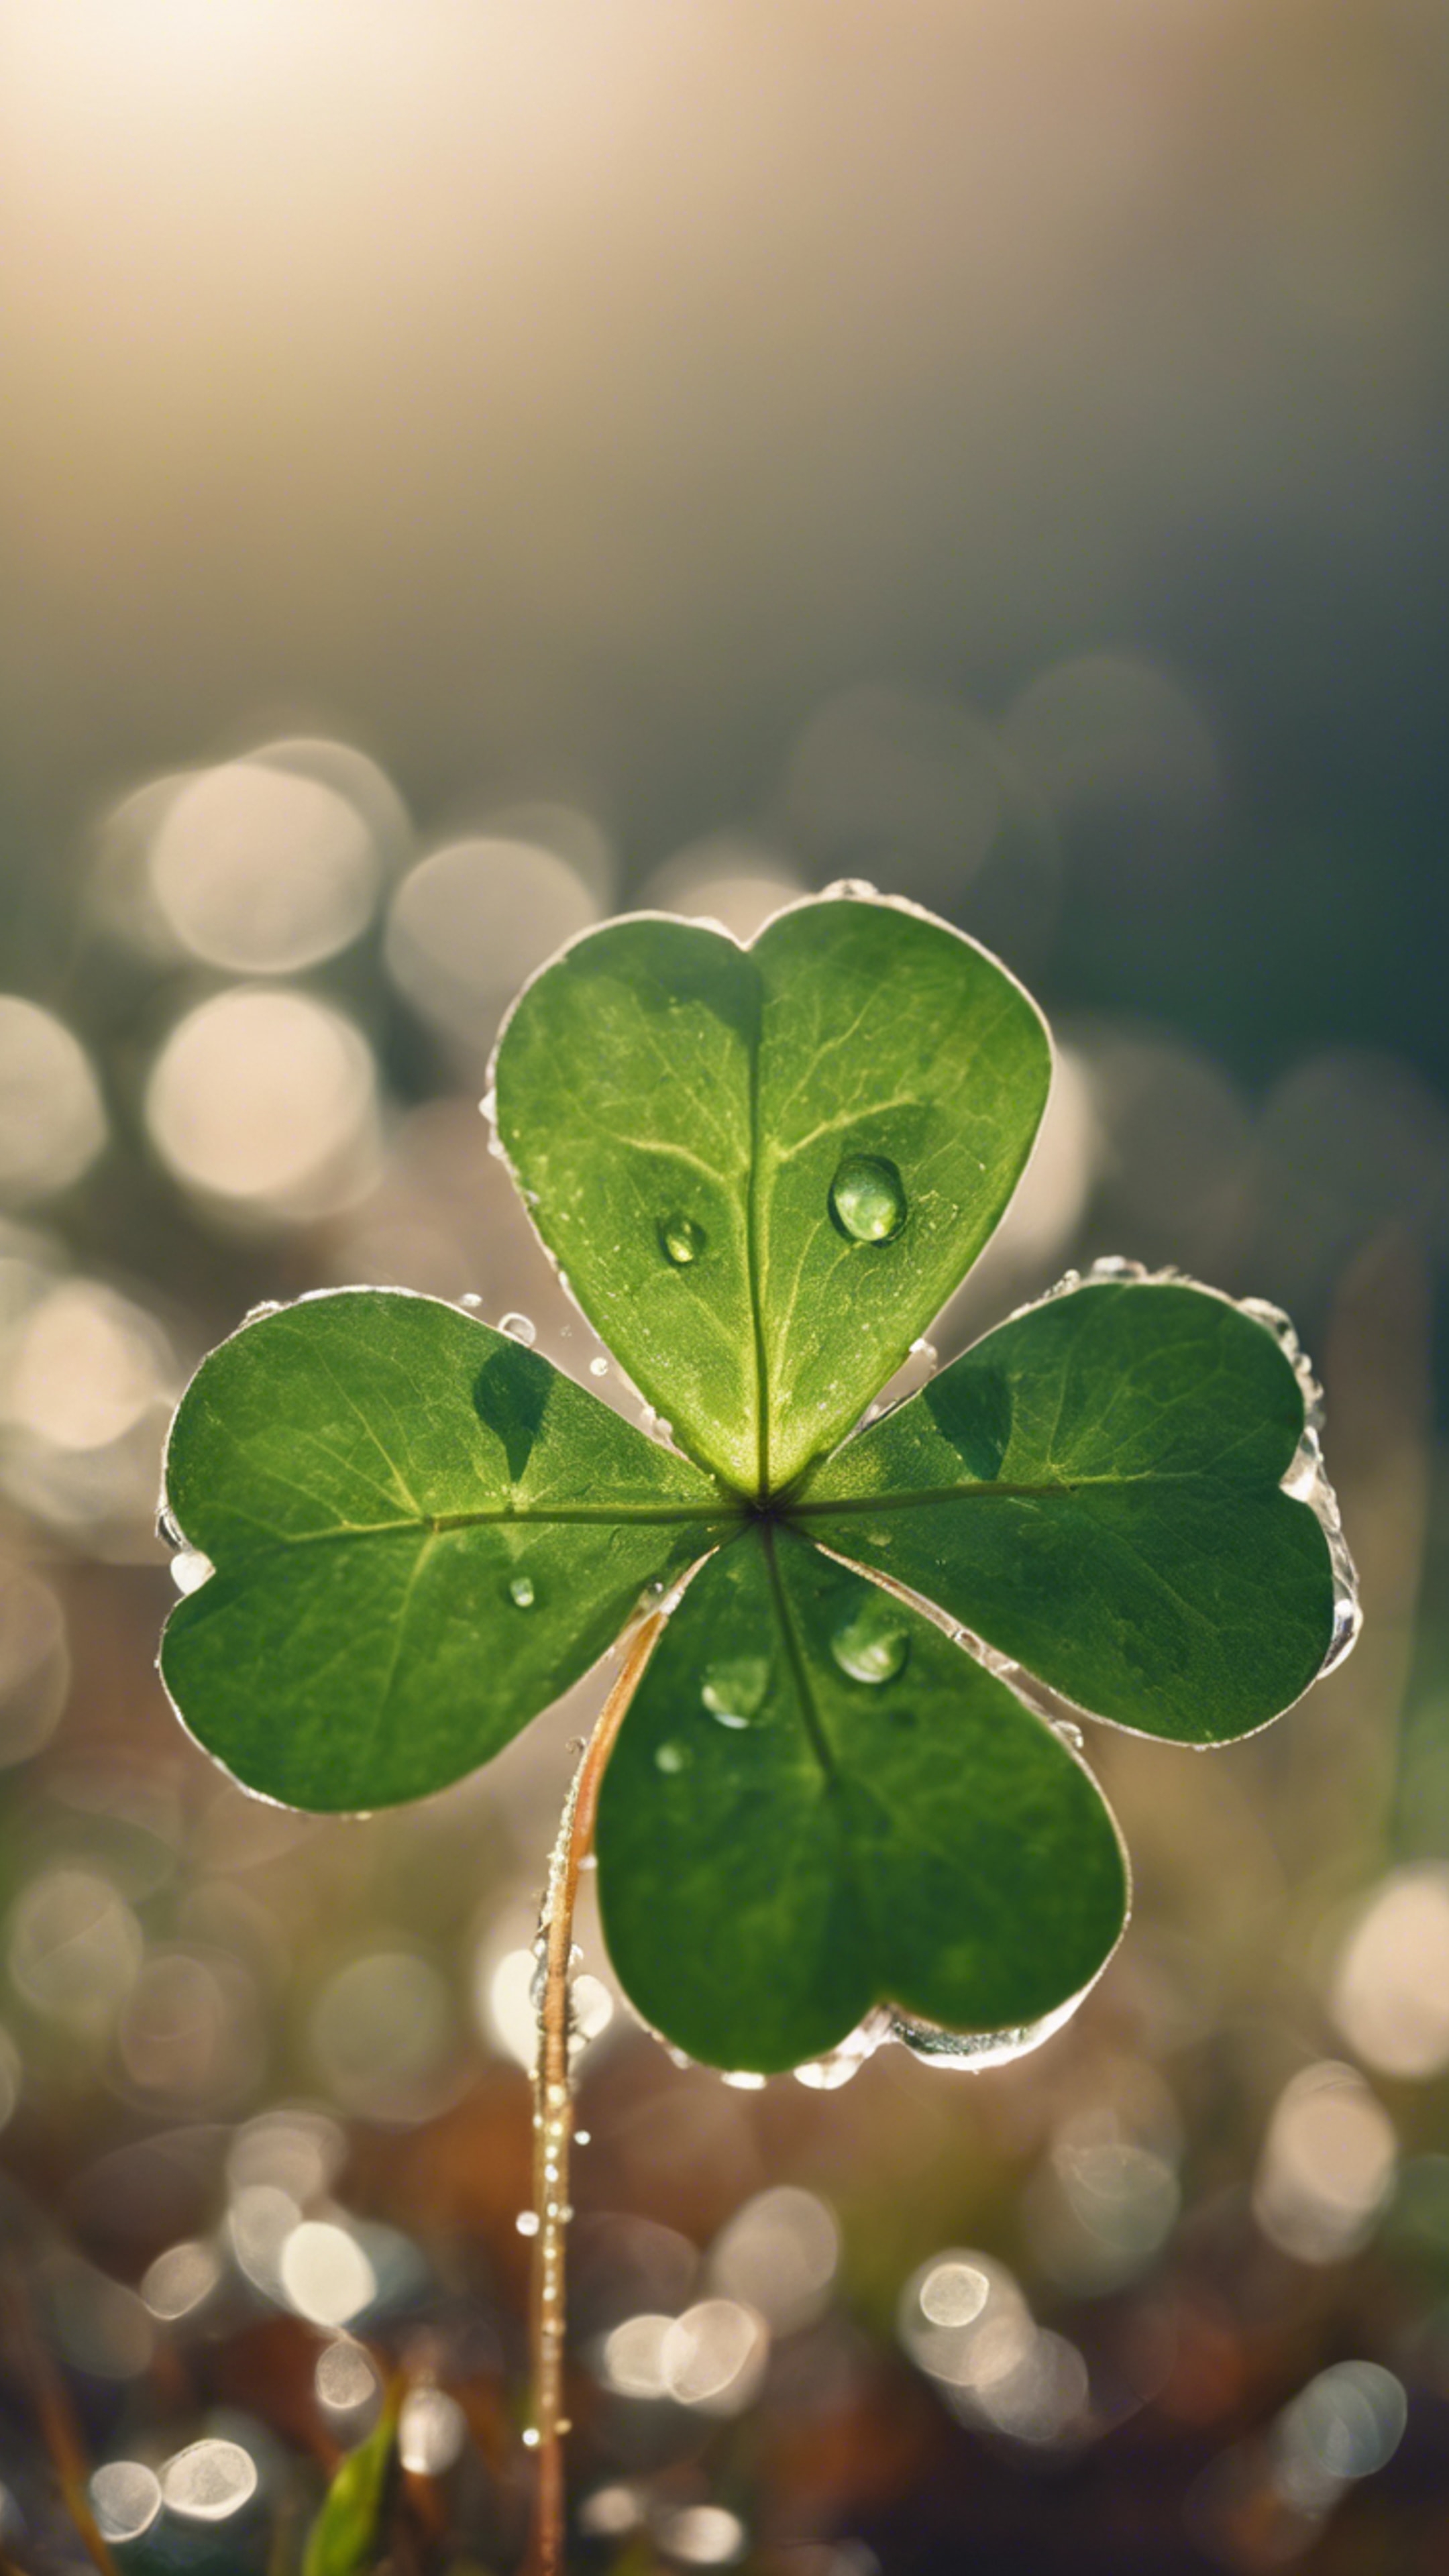 A close-up view of a four leaf clover gleaming in the morning dew.壁紙[b8d84a1222284df192e8]